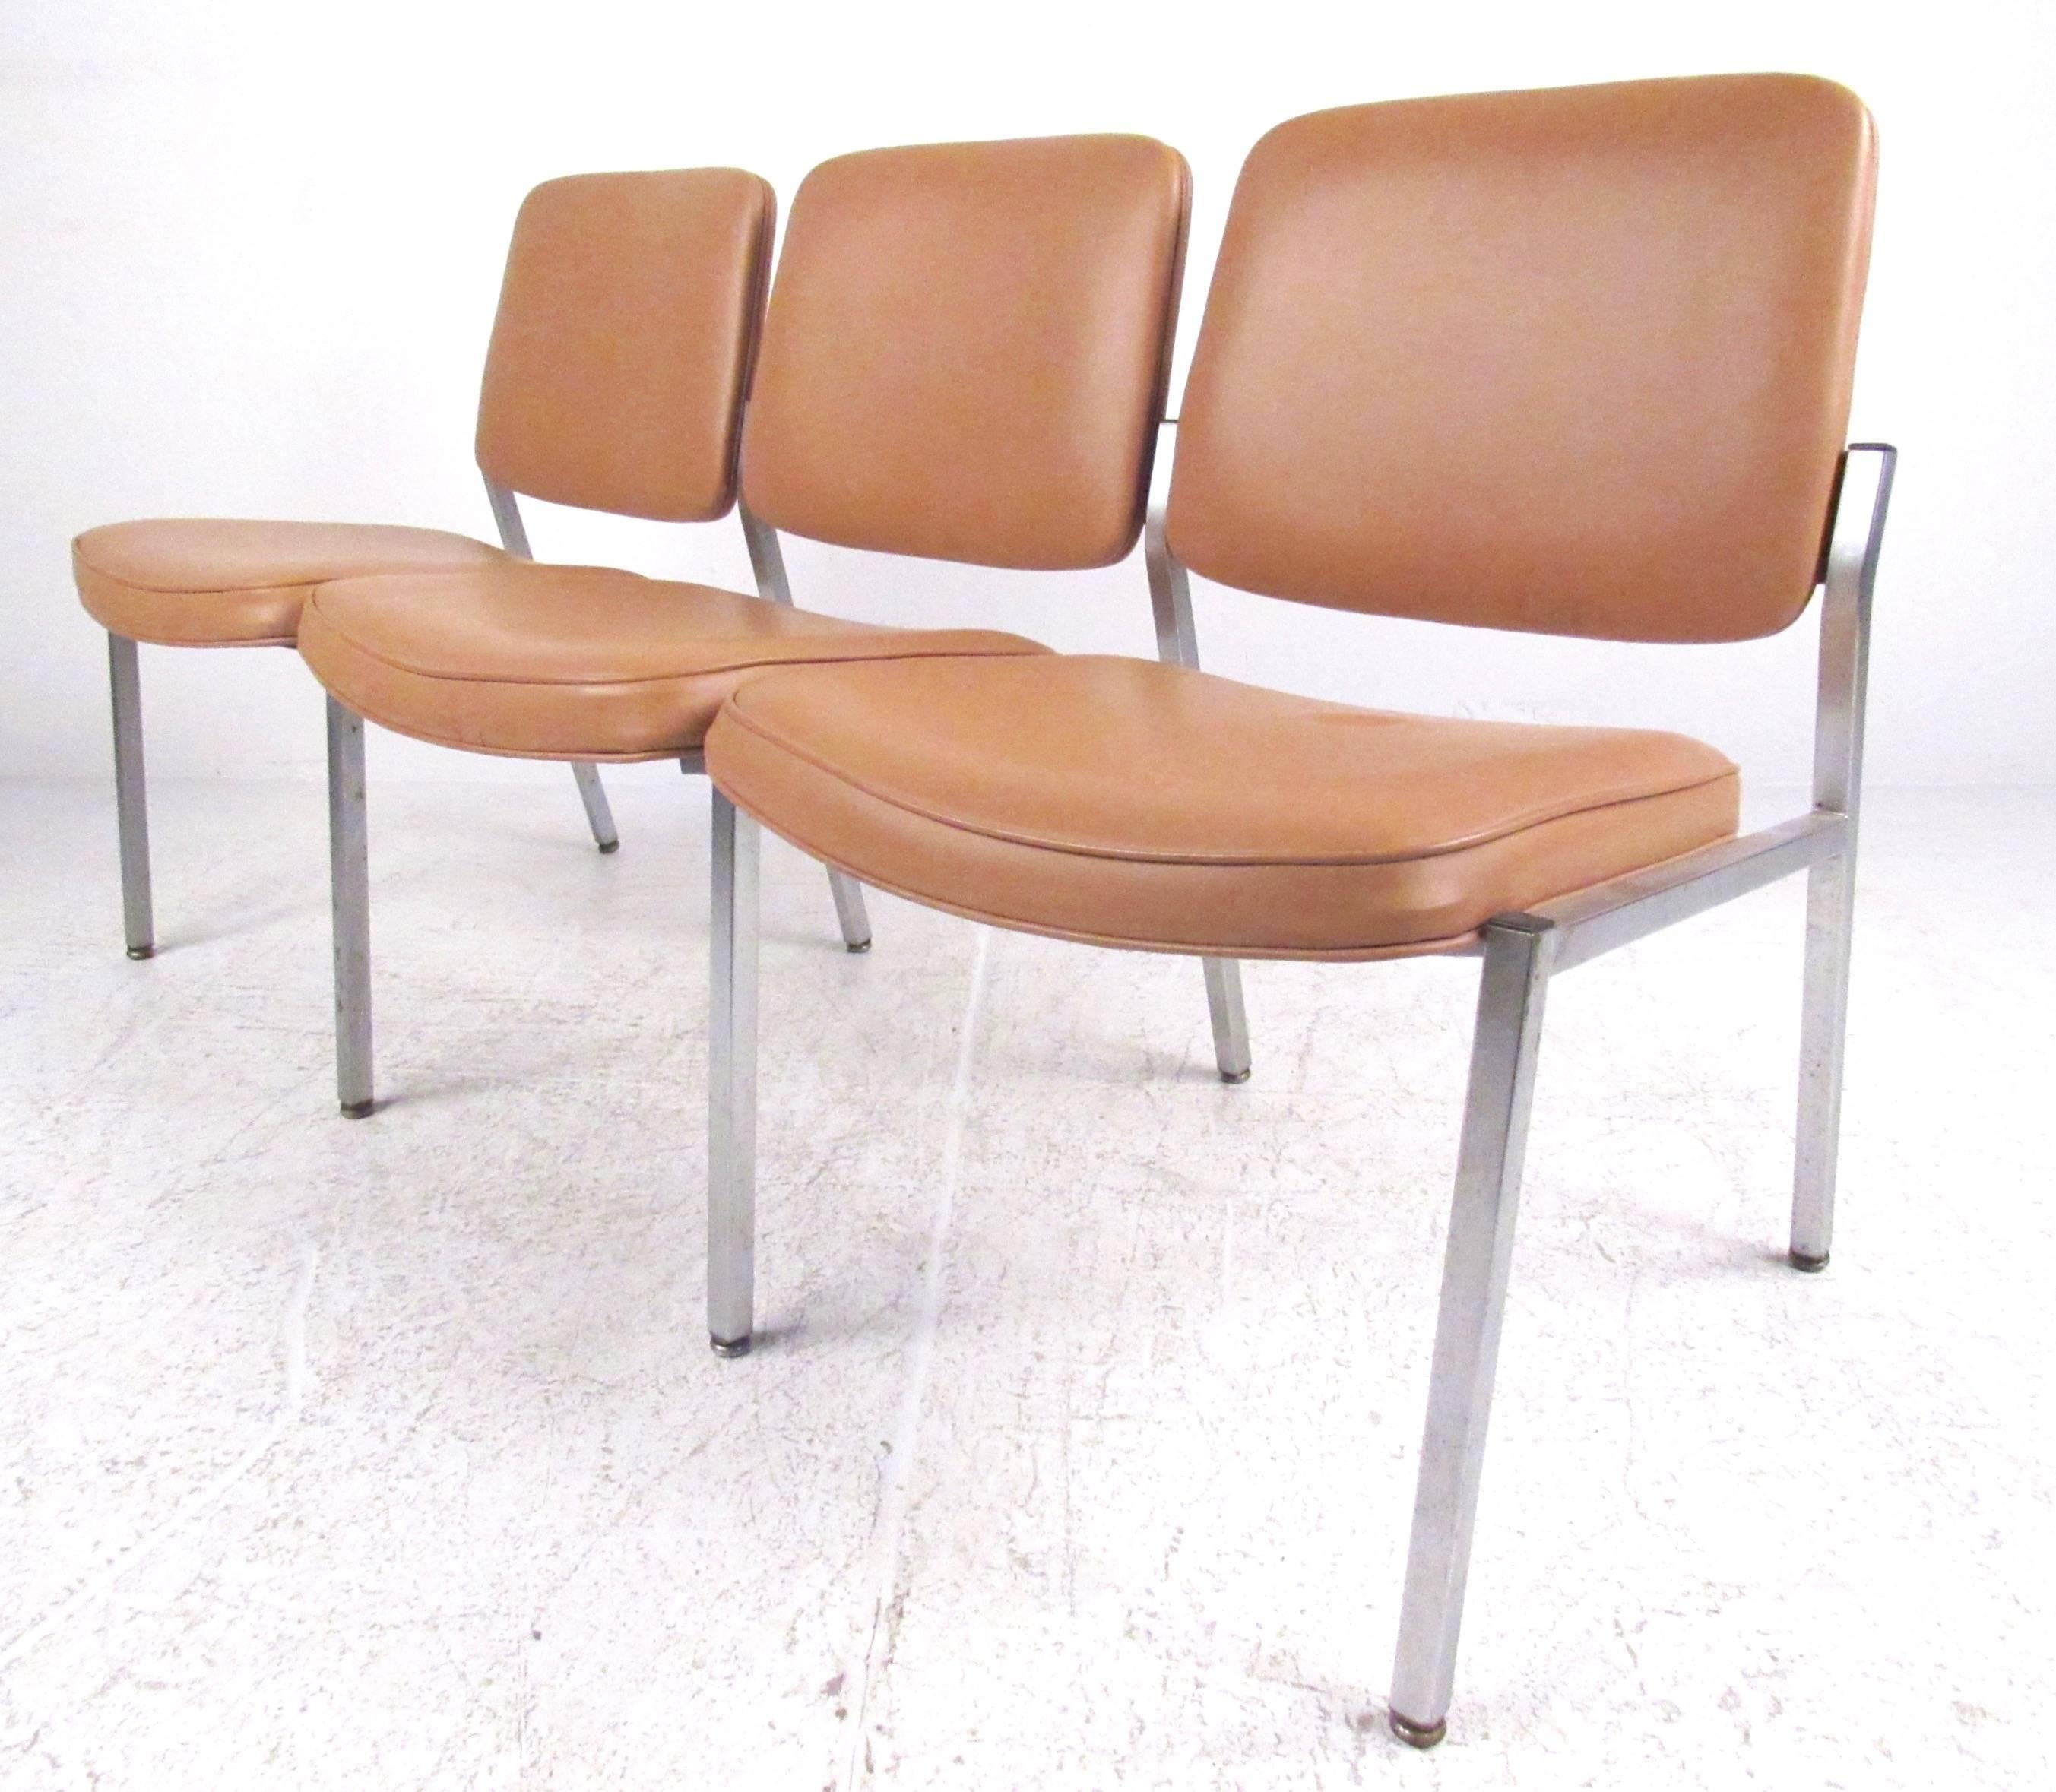 This Mid-Century waiting room bench features stylish vinyl seats with sturdy metal frame. Vintage three seat design makes this unique vintage bench a stylish addition to any interior. Please confirm item location (NY or NJ).